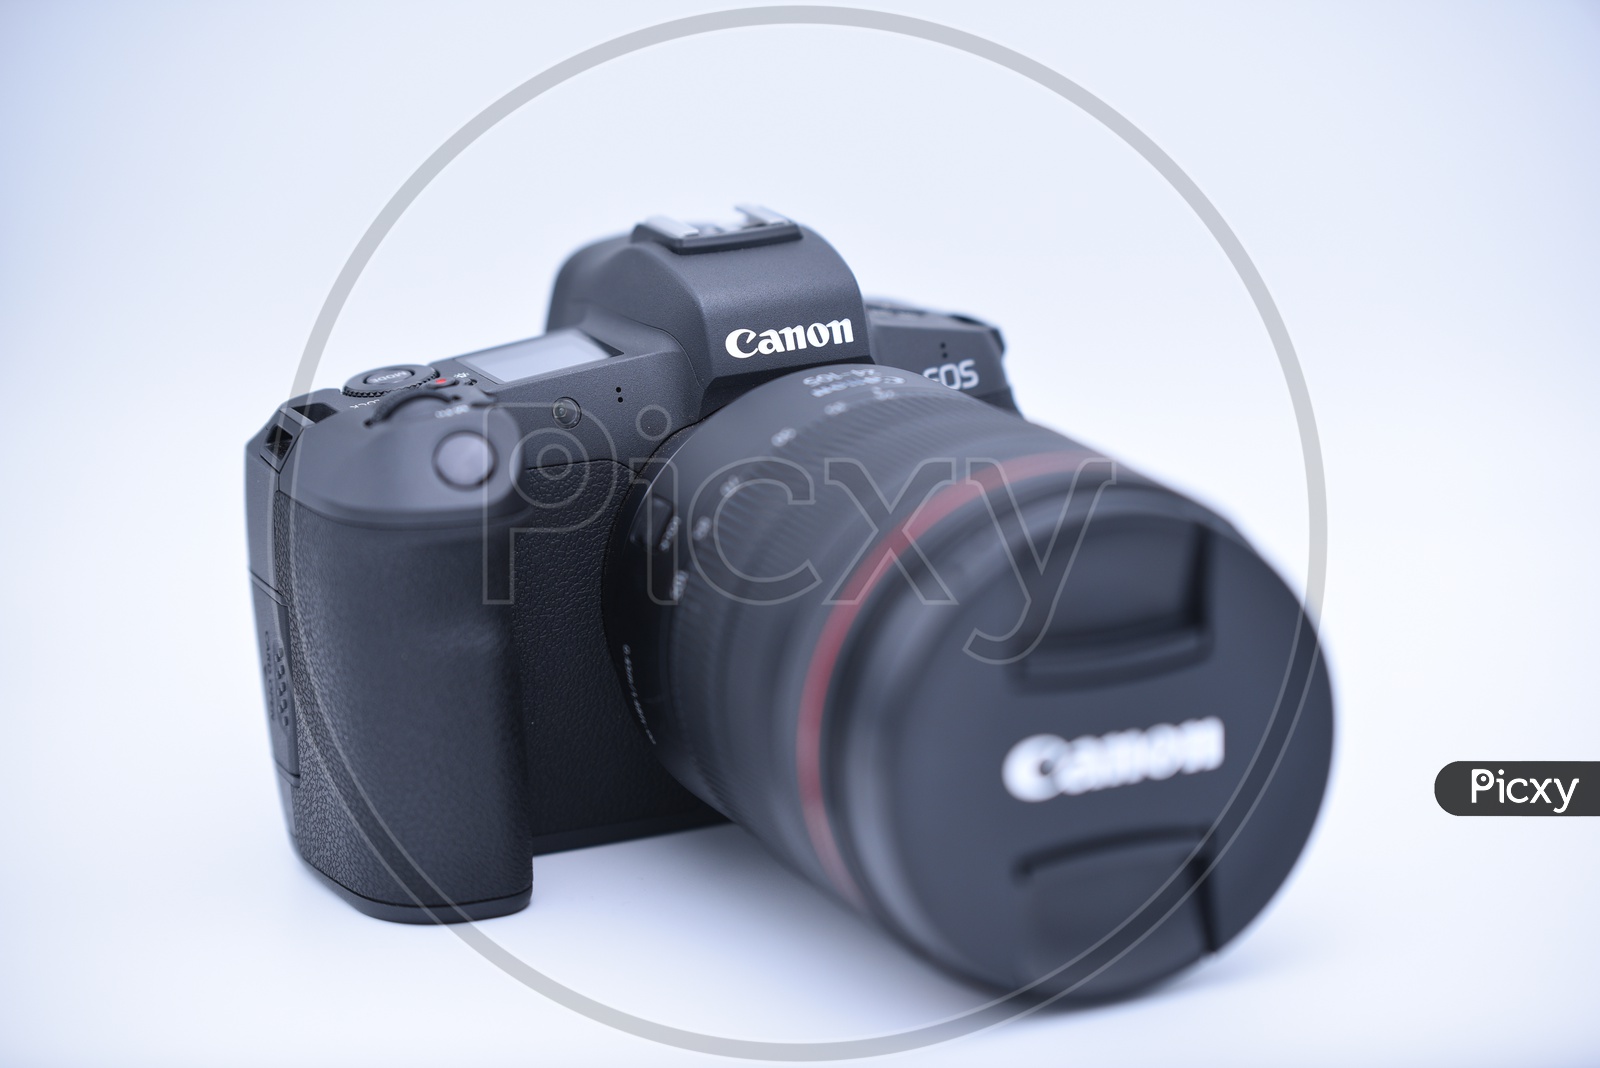 Cannon EOS R  Camera Mounted To 24 - 105 mm Lens On an Isolated White Background